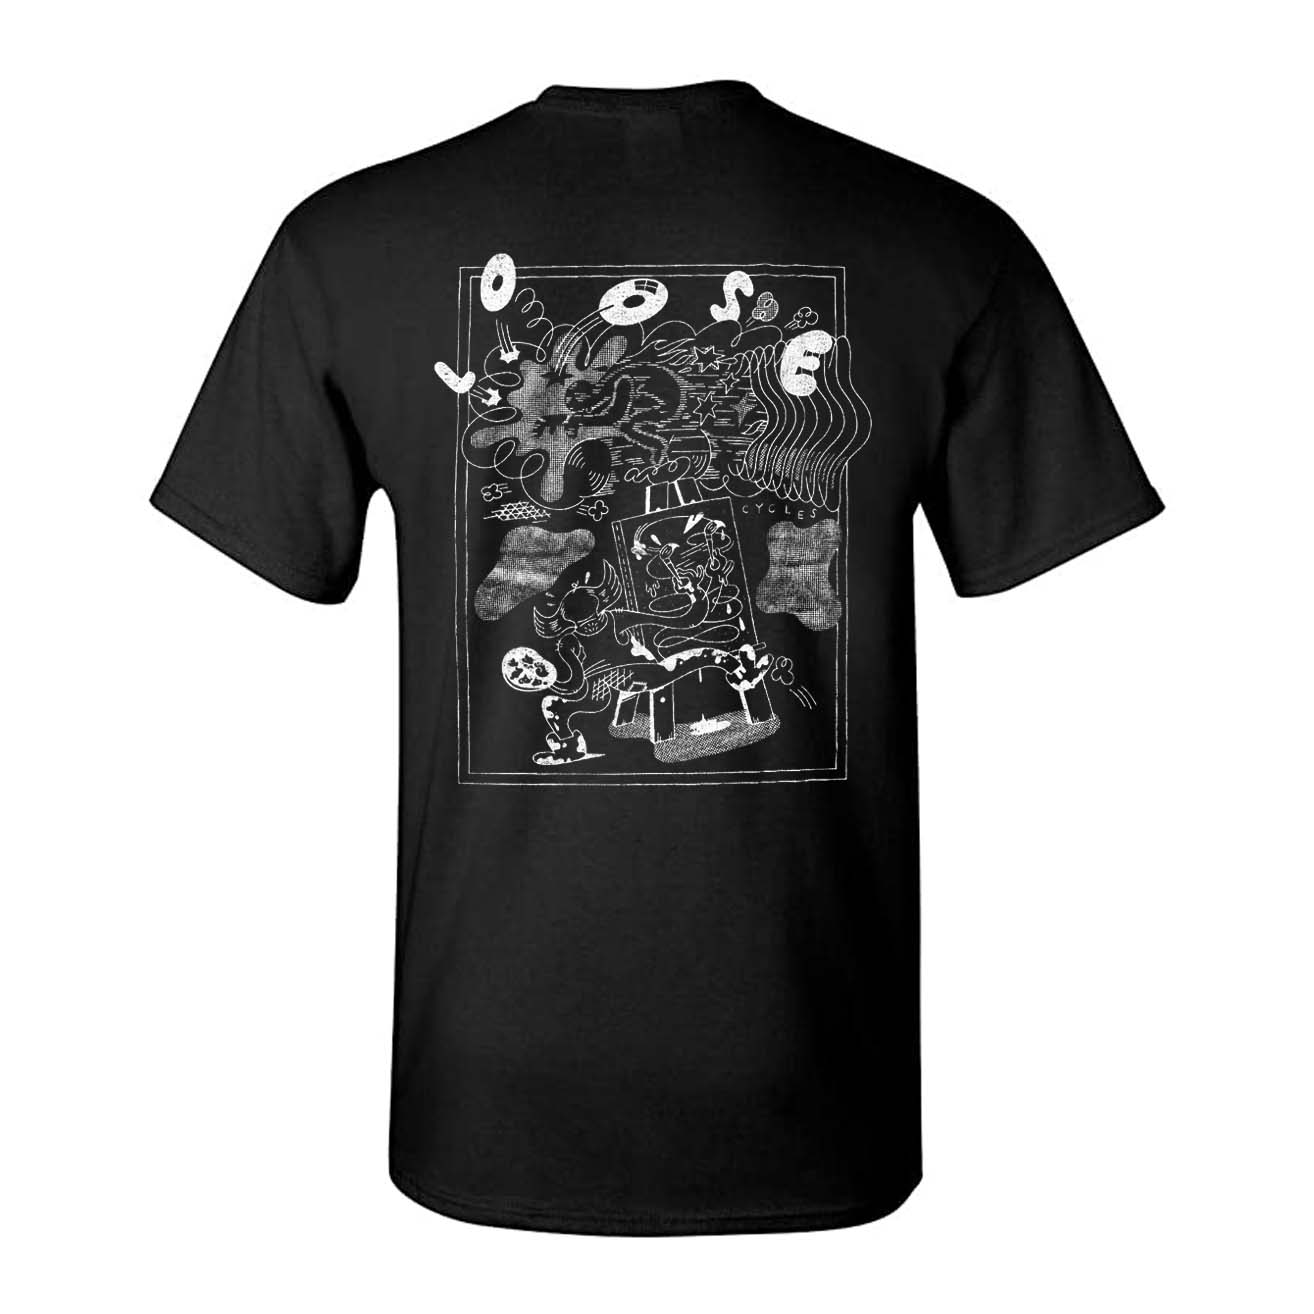 Loose Cycles - Action Painting T-Shirt